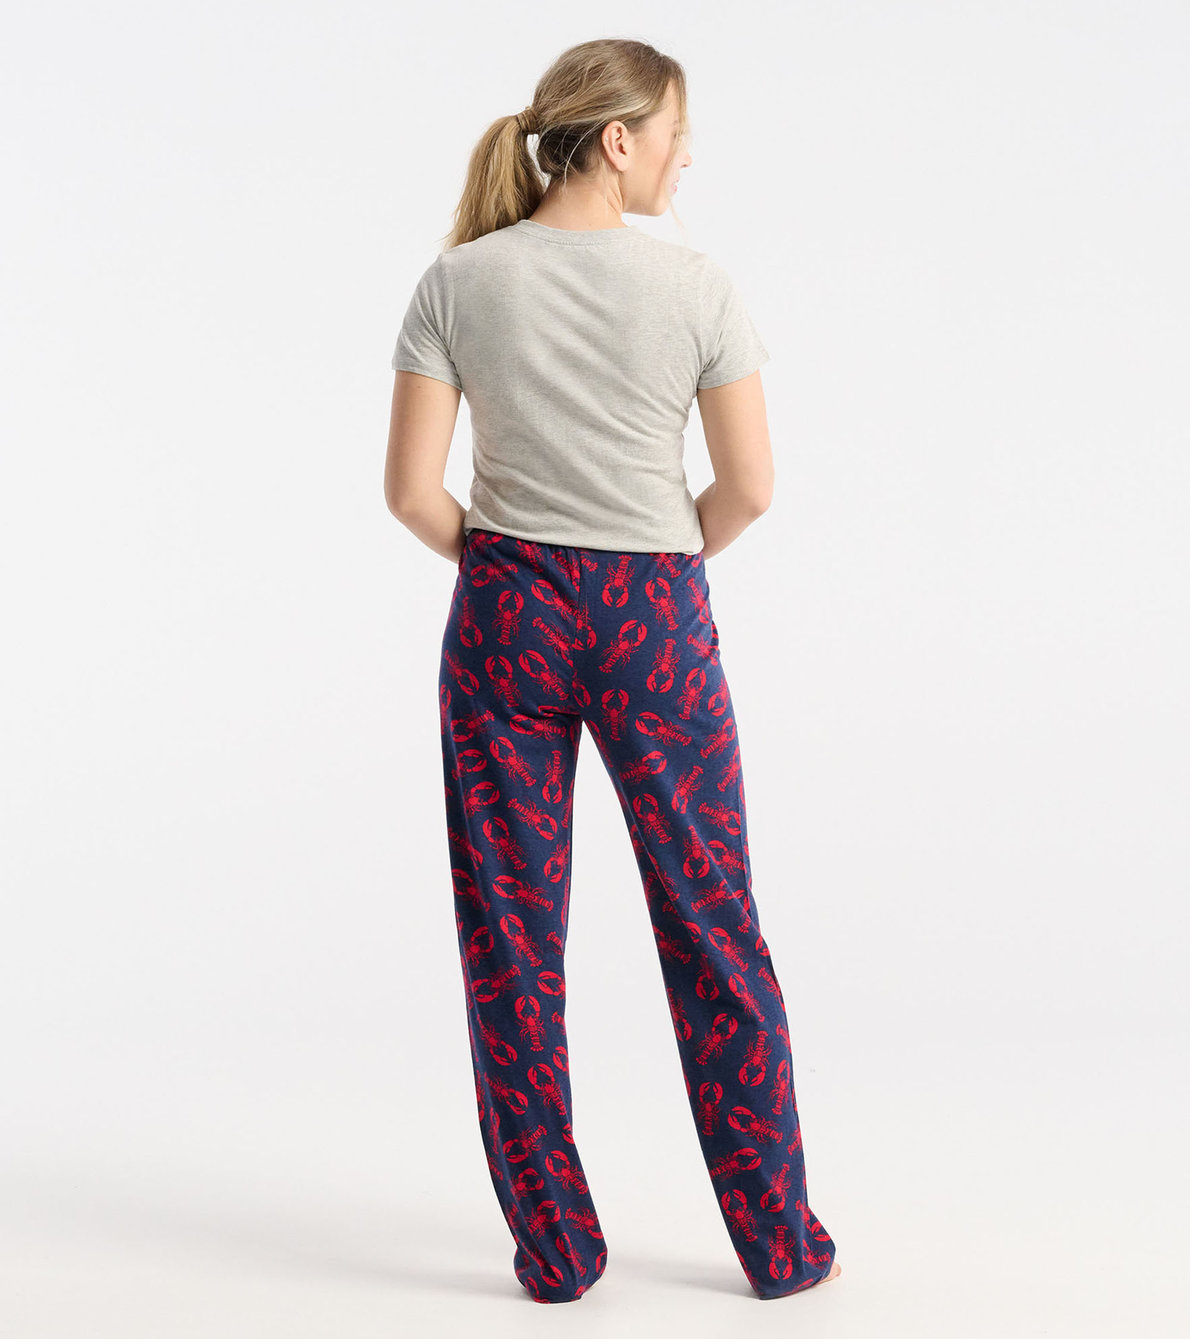 View larger image of Navy Lobster Women's Jersey Pajama Pants